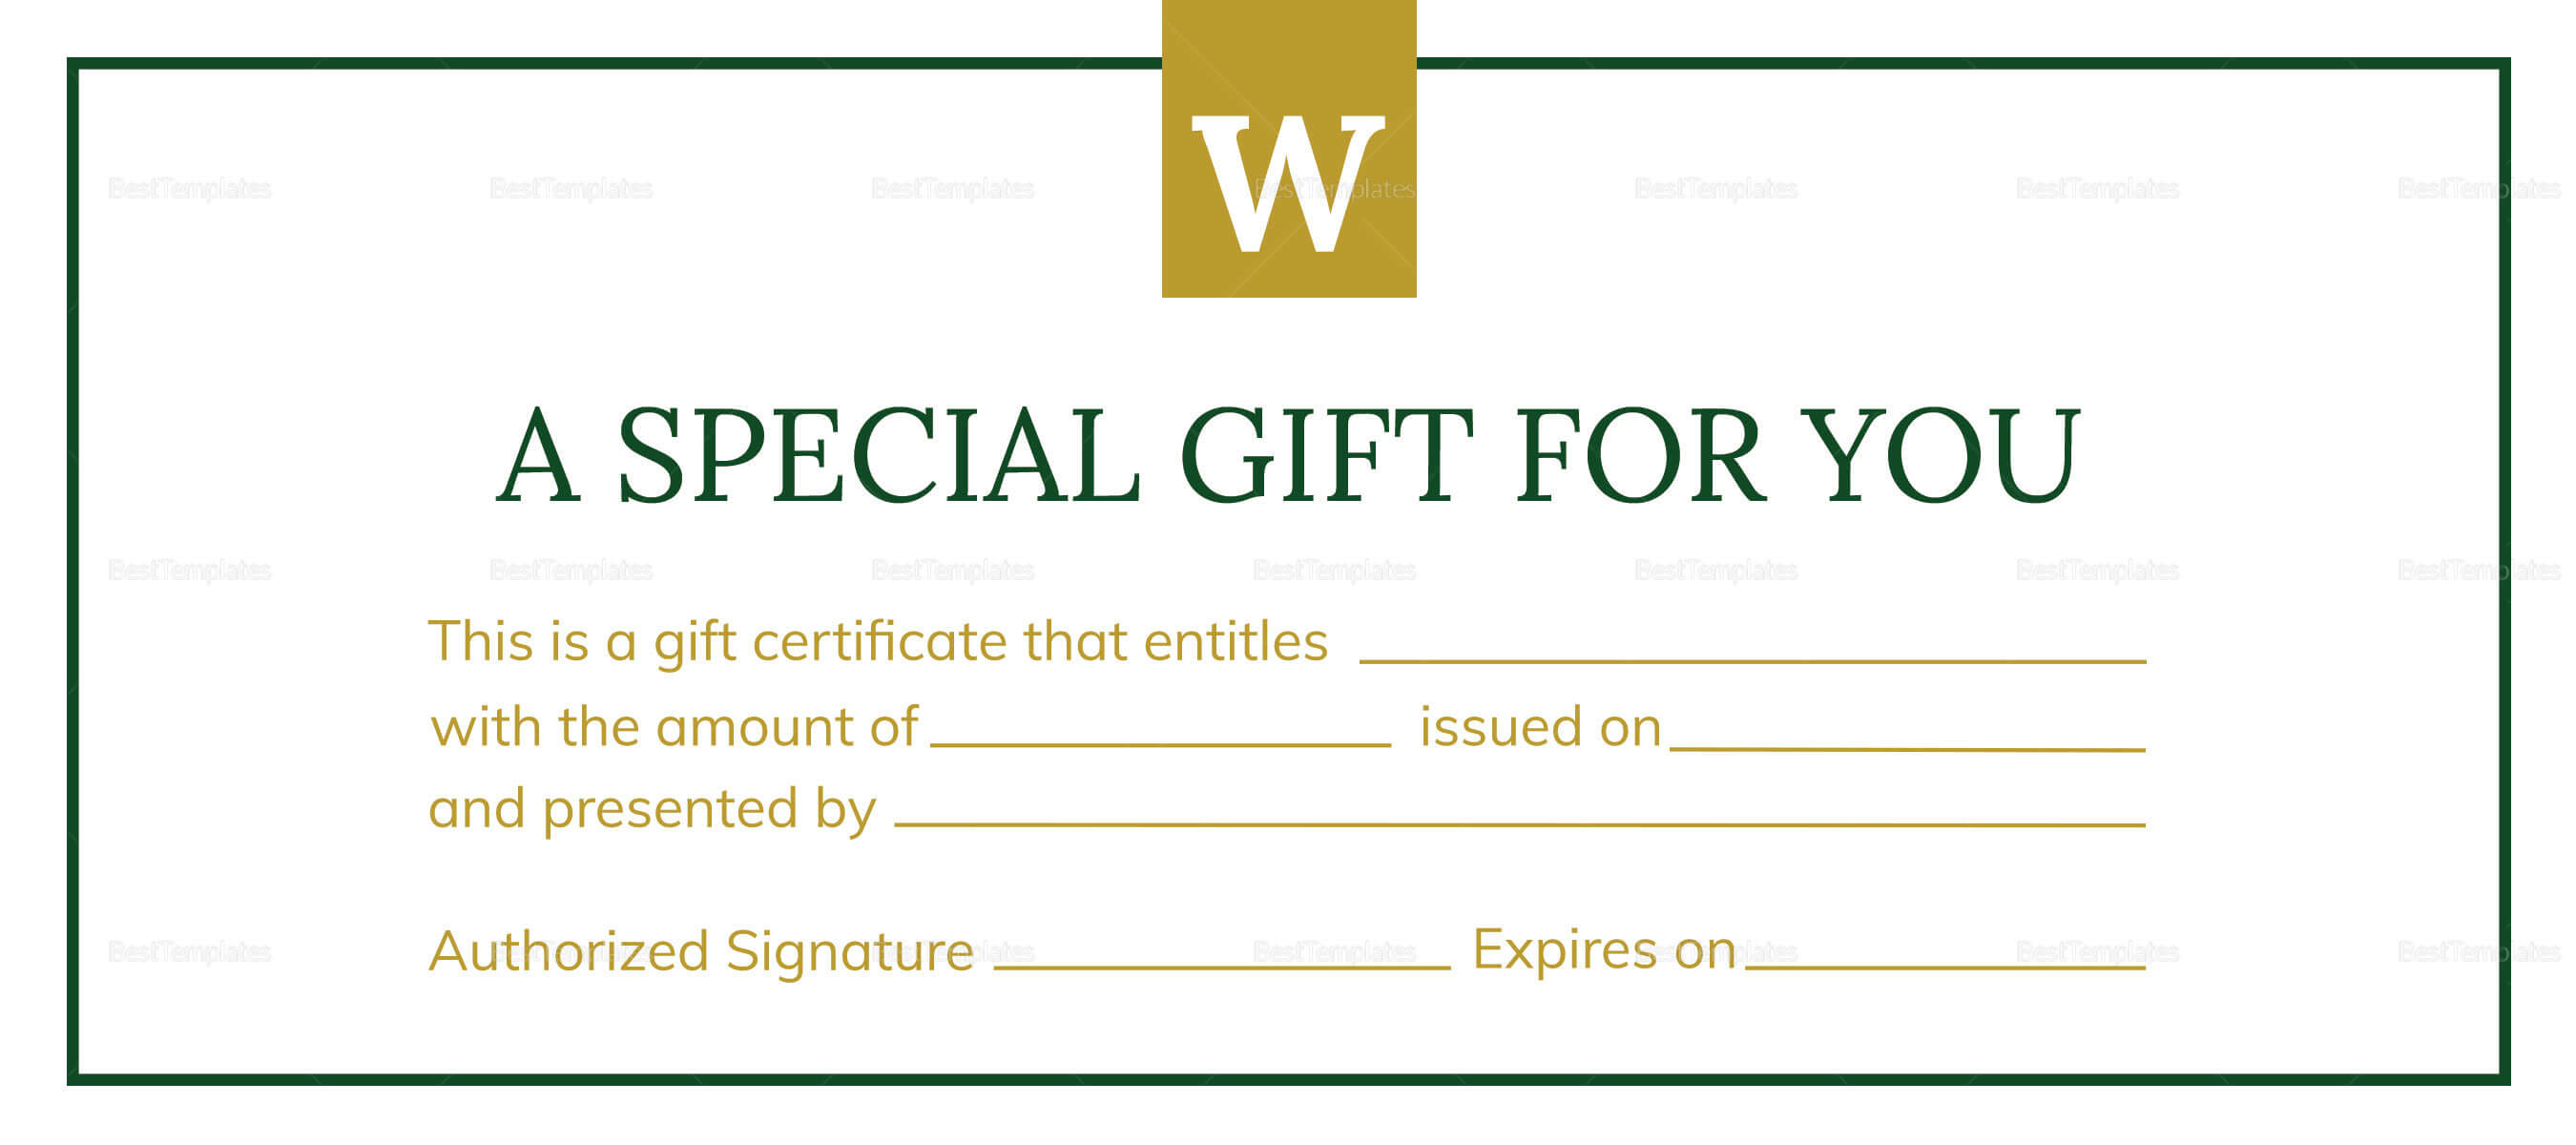 Hotel Gift Certificate Template In Gift Certificate Template Publisher